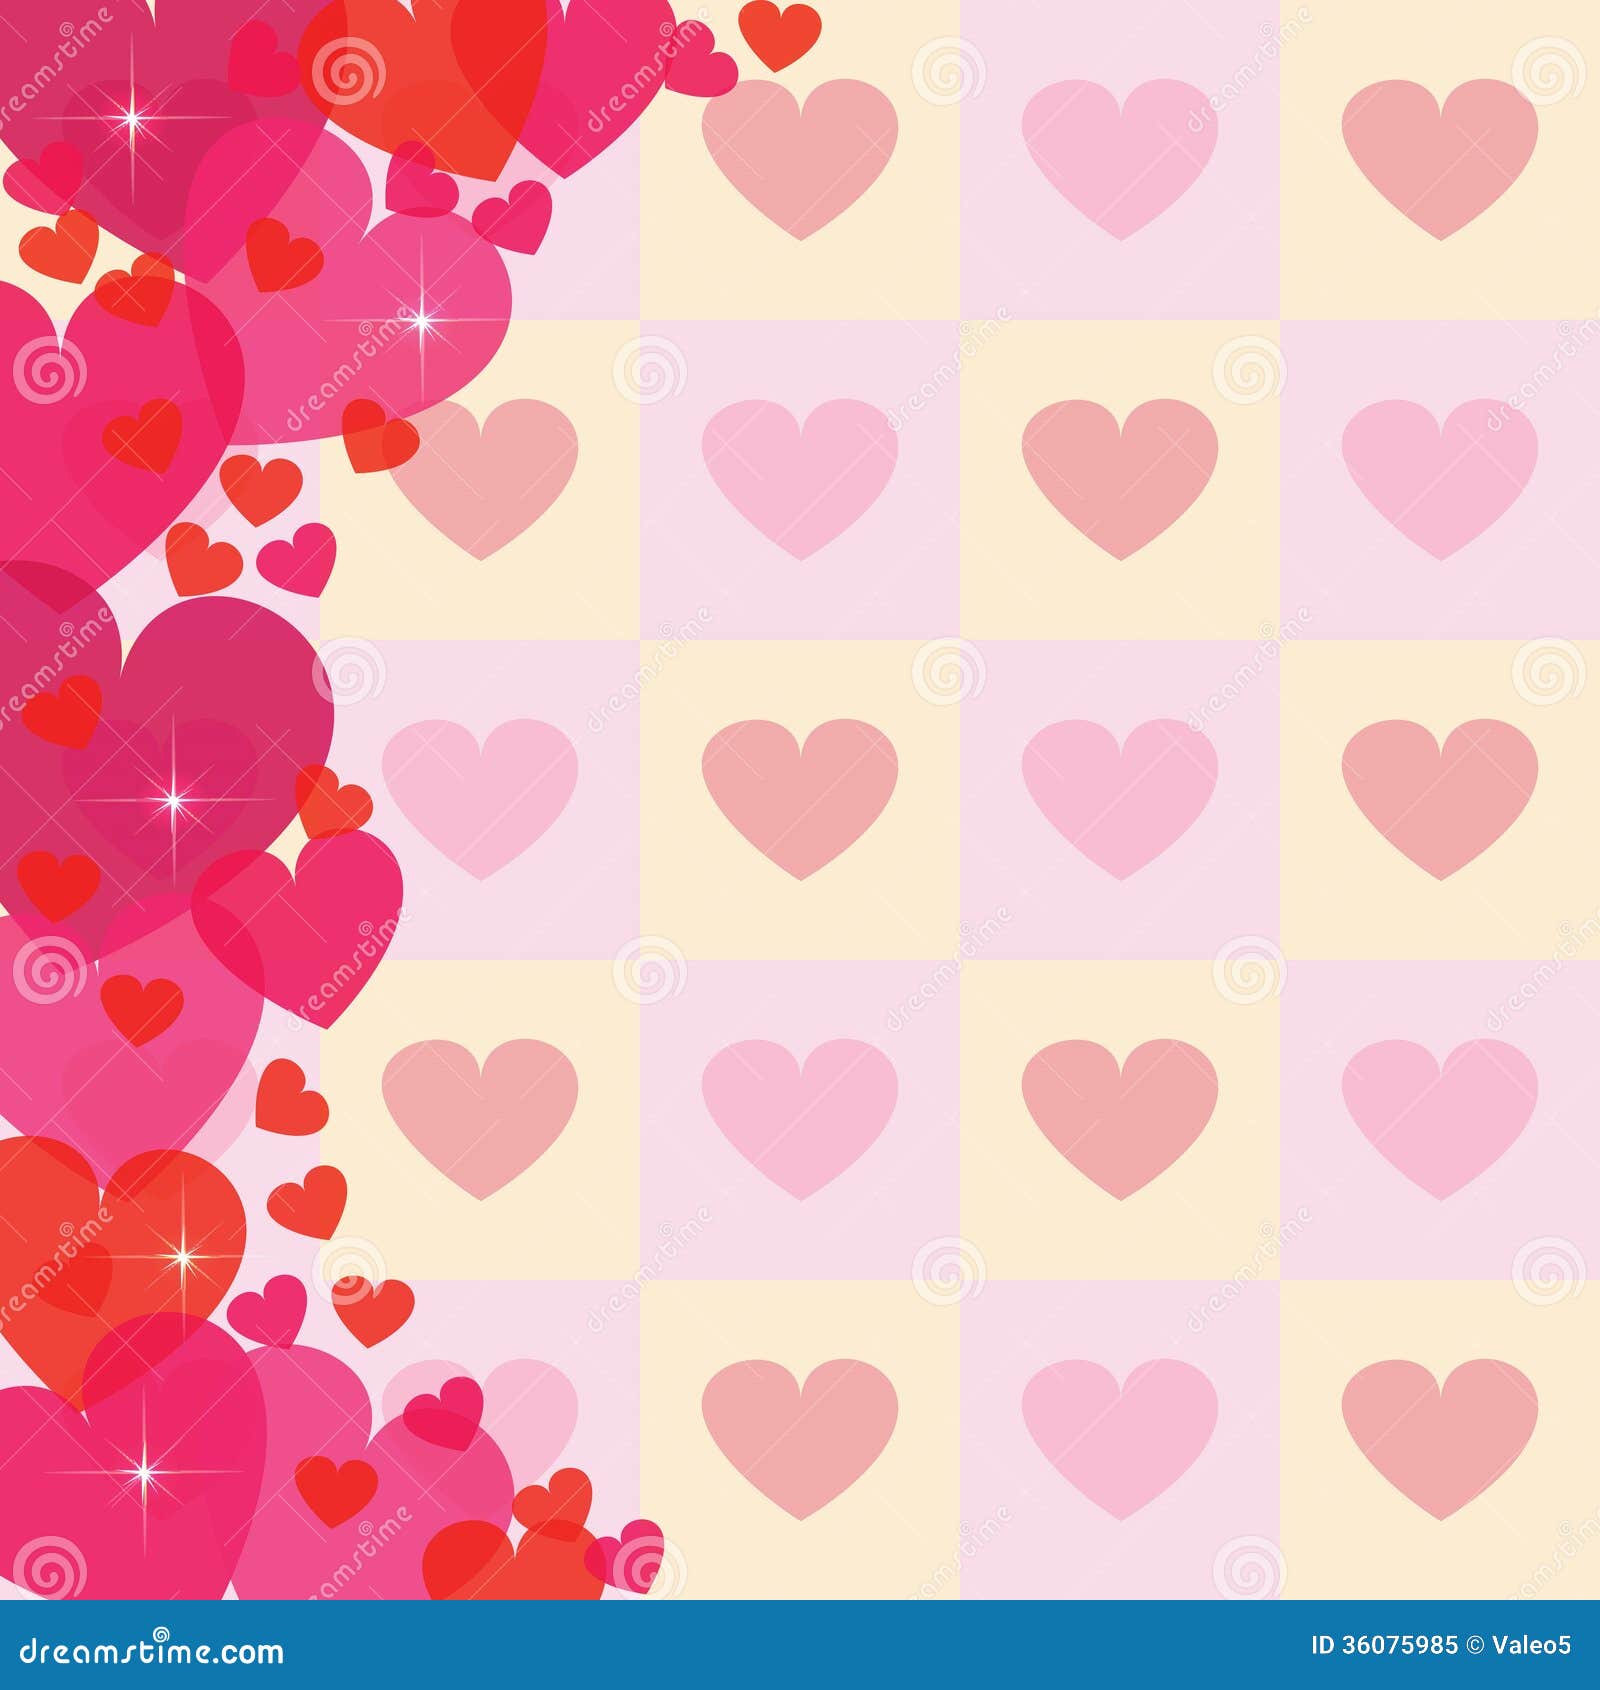 Abstract Heart Background Royalty Free Stock Photo - Image: 36075985